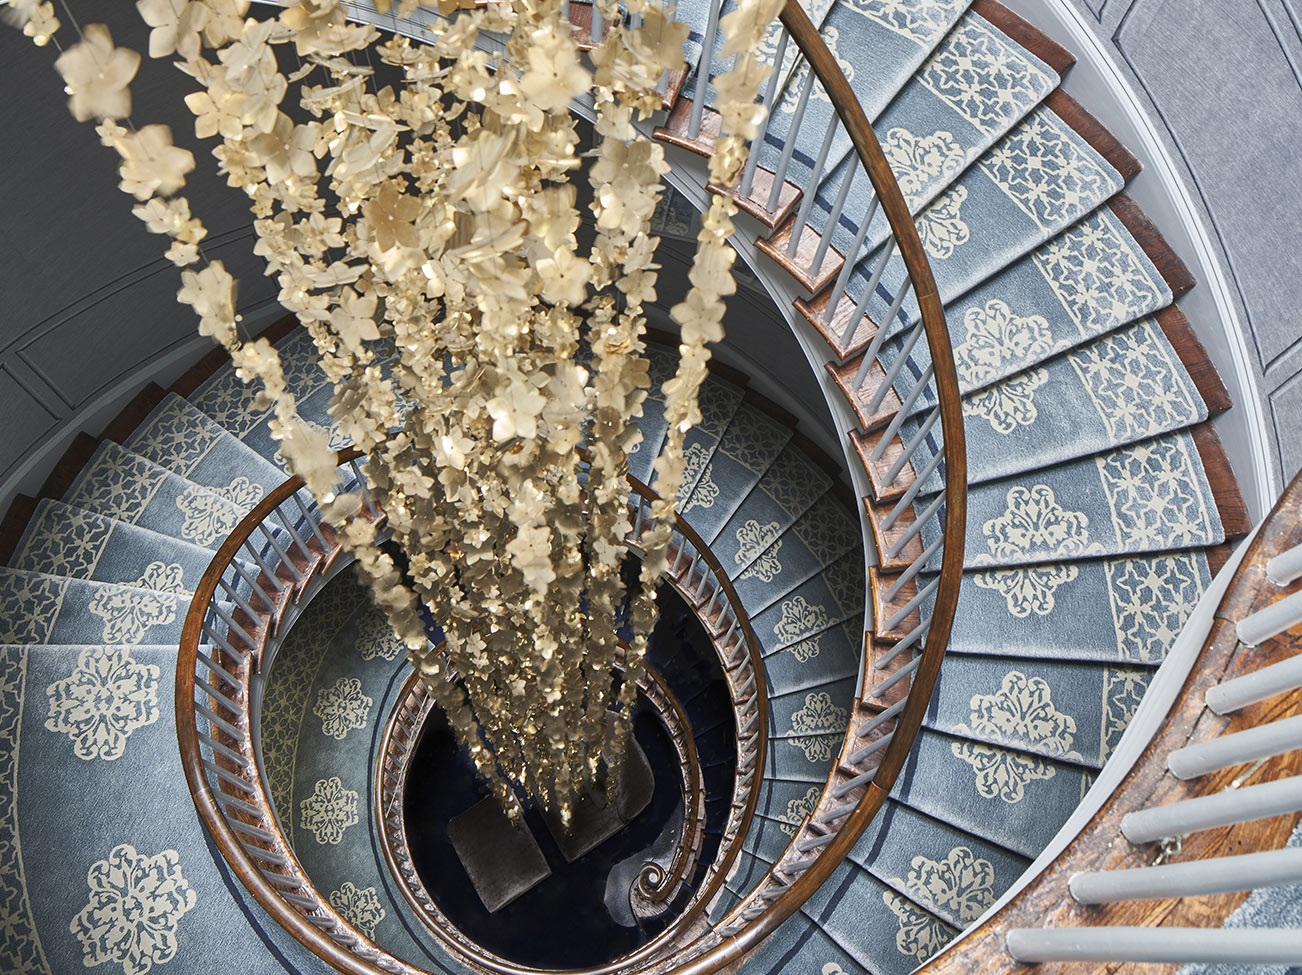 A 40' brass Cherry Blossom mobile, with 4,000+ metal flowers, cascades down the center of a spiral staircase at the 2019 Kips Bay Decorators Show House  NYC.  